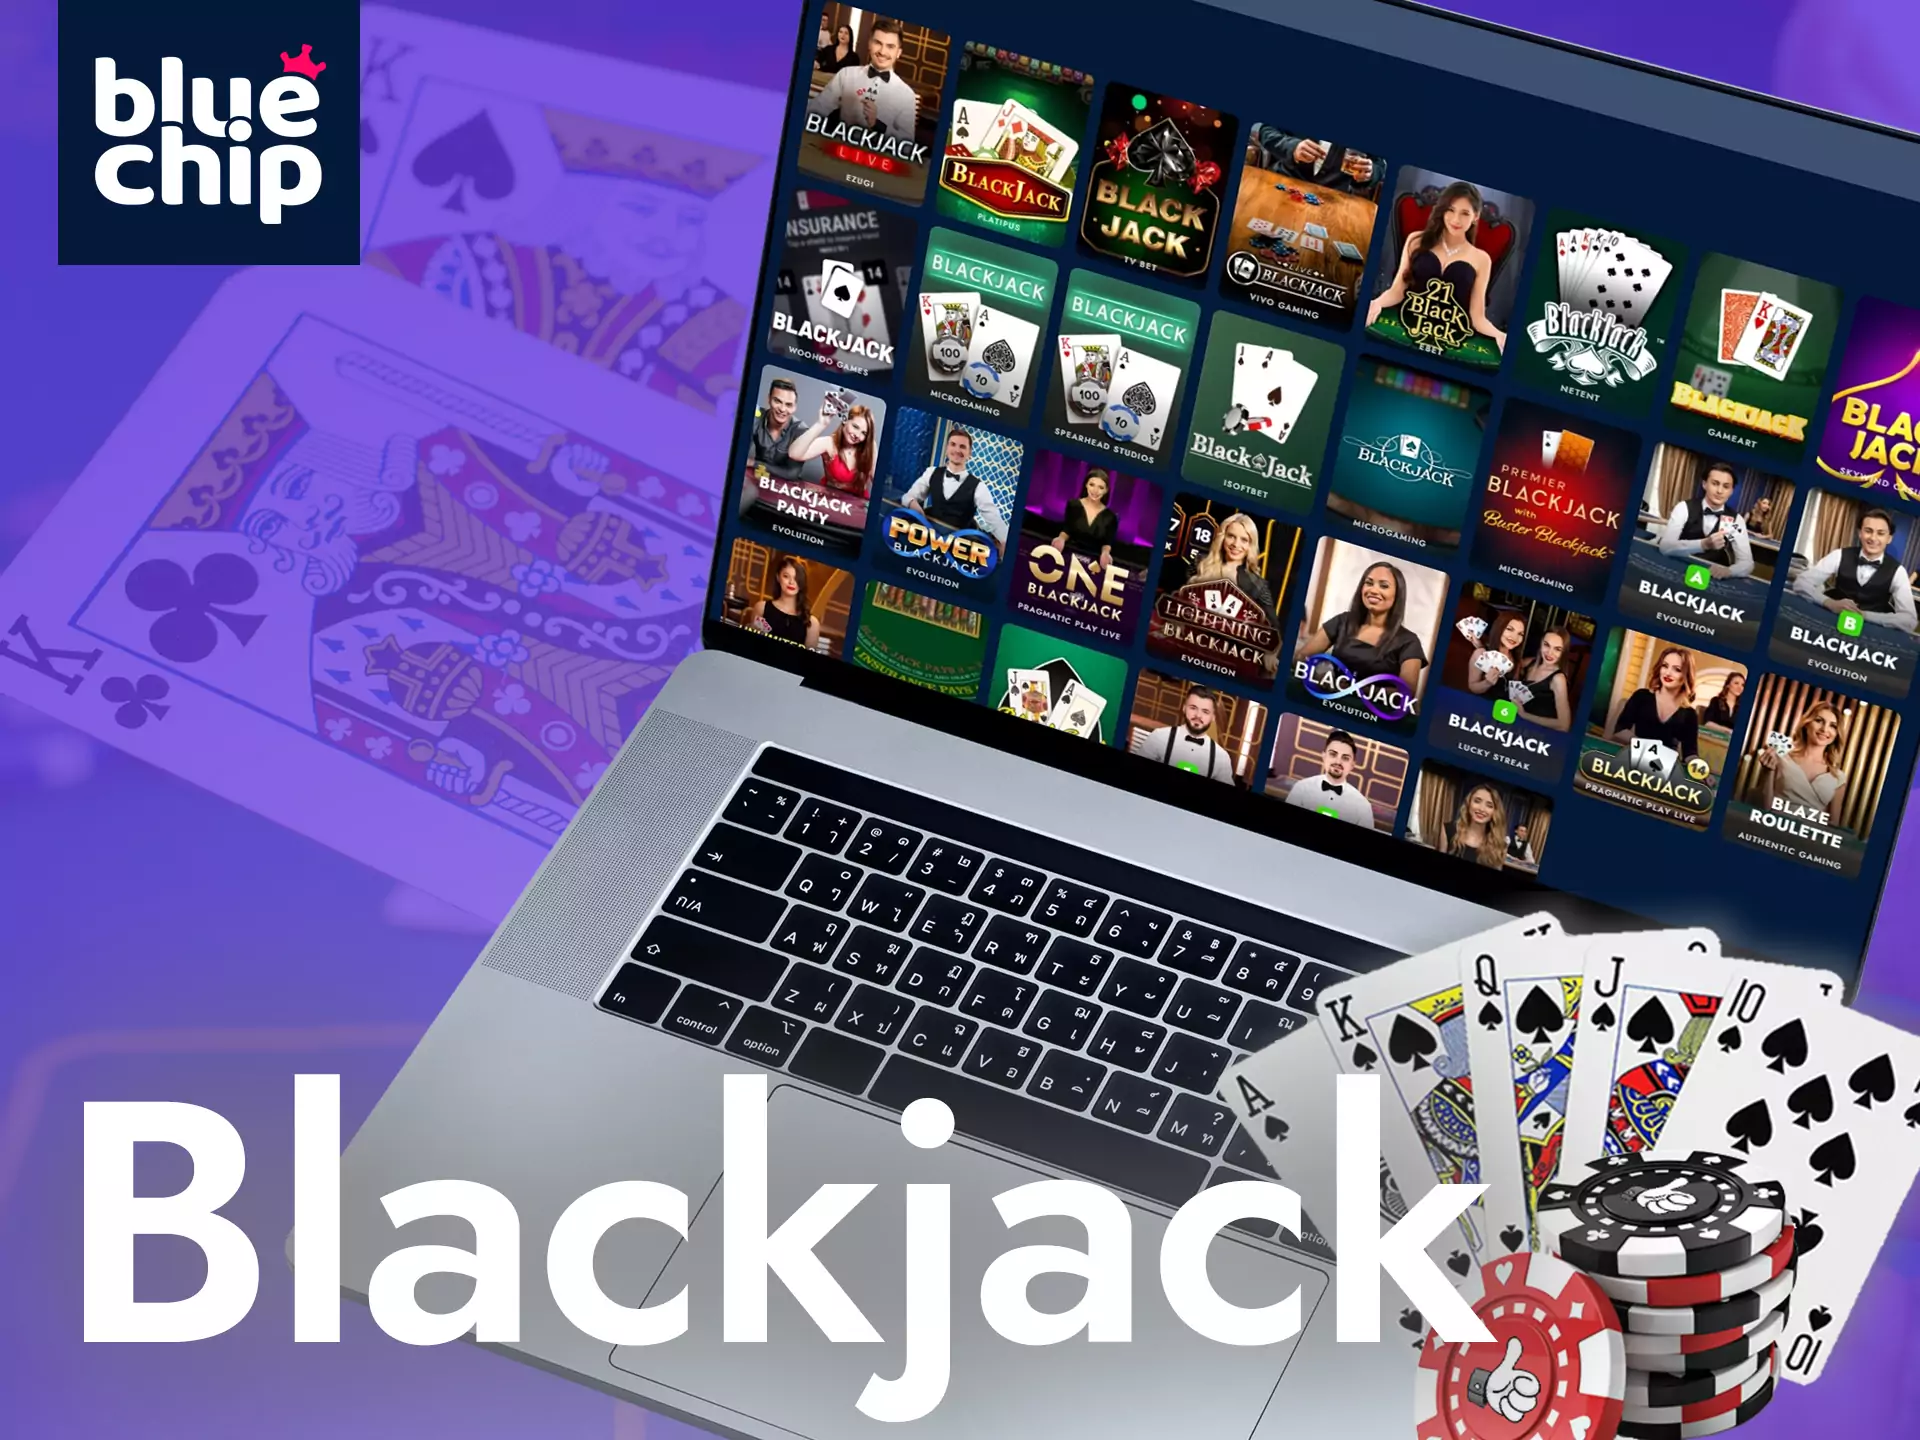 To play blackjack with real dealers, visit the Bluechip Casino.